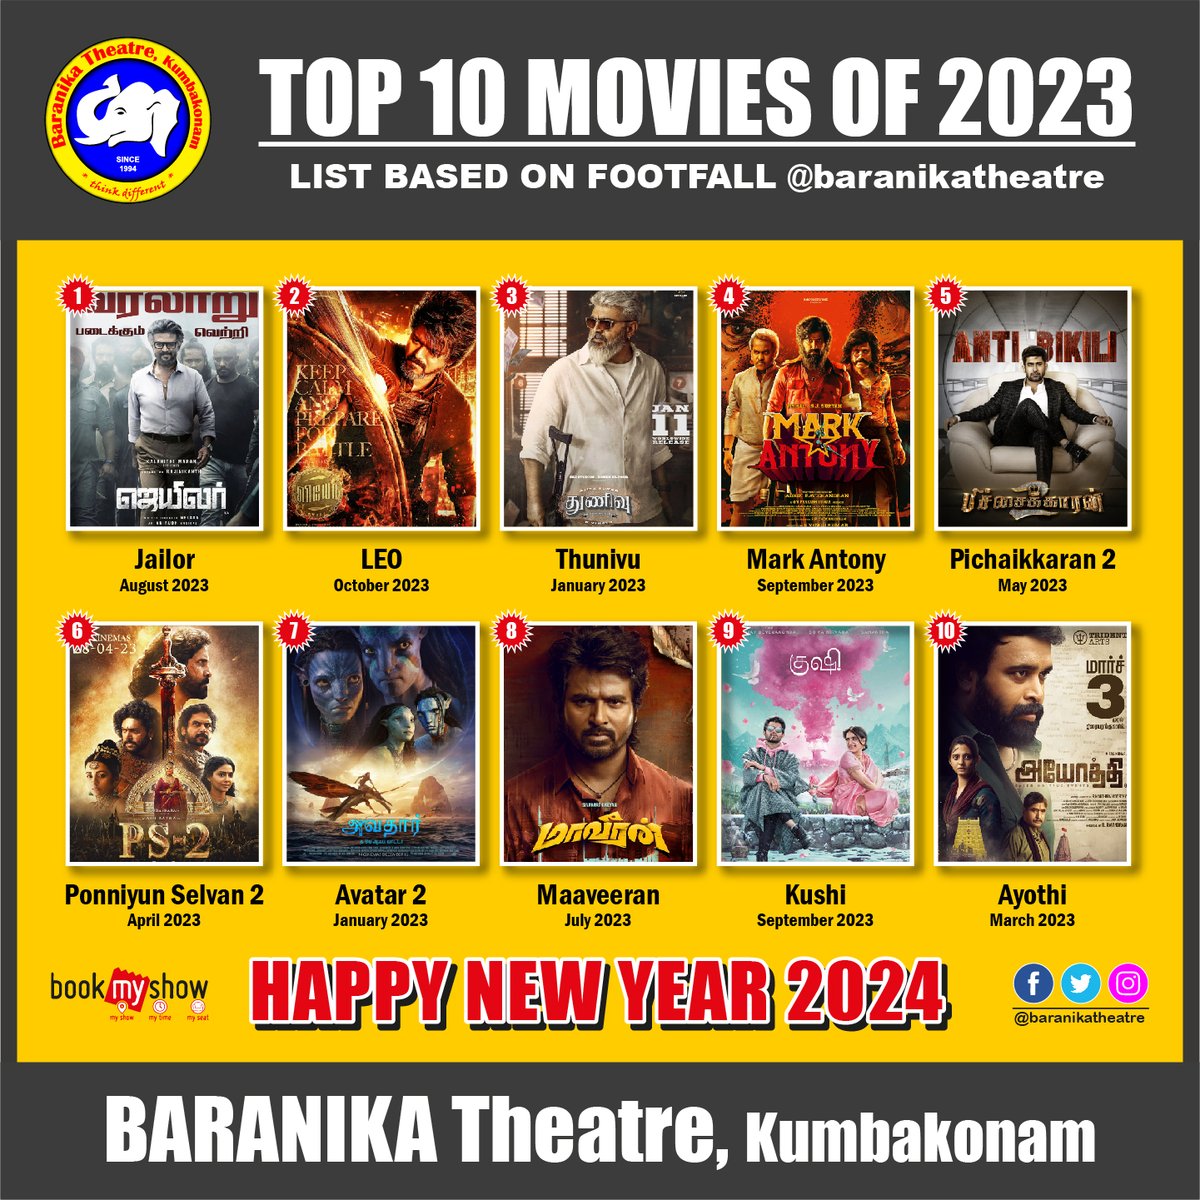 ⭐️⭐️⭐️HAPPY NEW YEAR 2024 to all⭐️⭐️⭐️

Here is the  Top10  movie for the year 2023, list based on audience count 

#Jailer #Leo #Thunivu #MarkAntony #Pichaikkaran2 #PS2 #Avatar2 #Maaveeran #Kushi #Ayodhya 

Thanks for the support and love from all good hearts